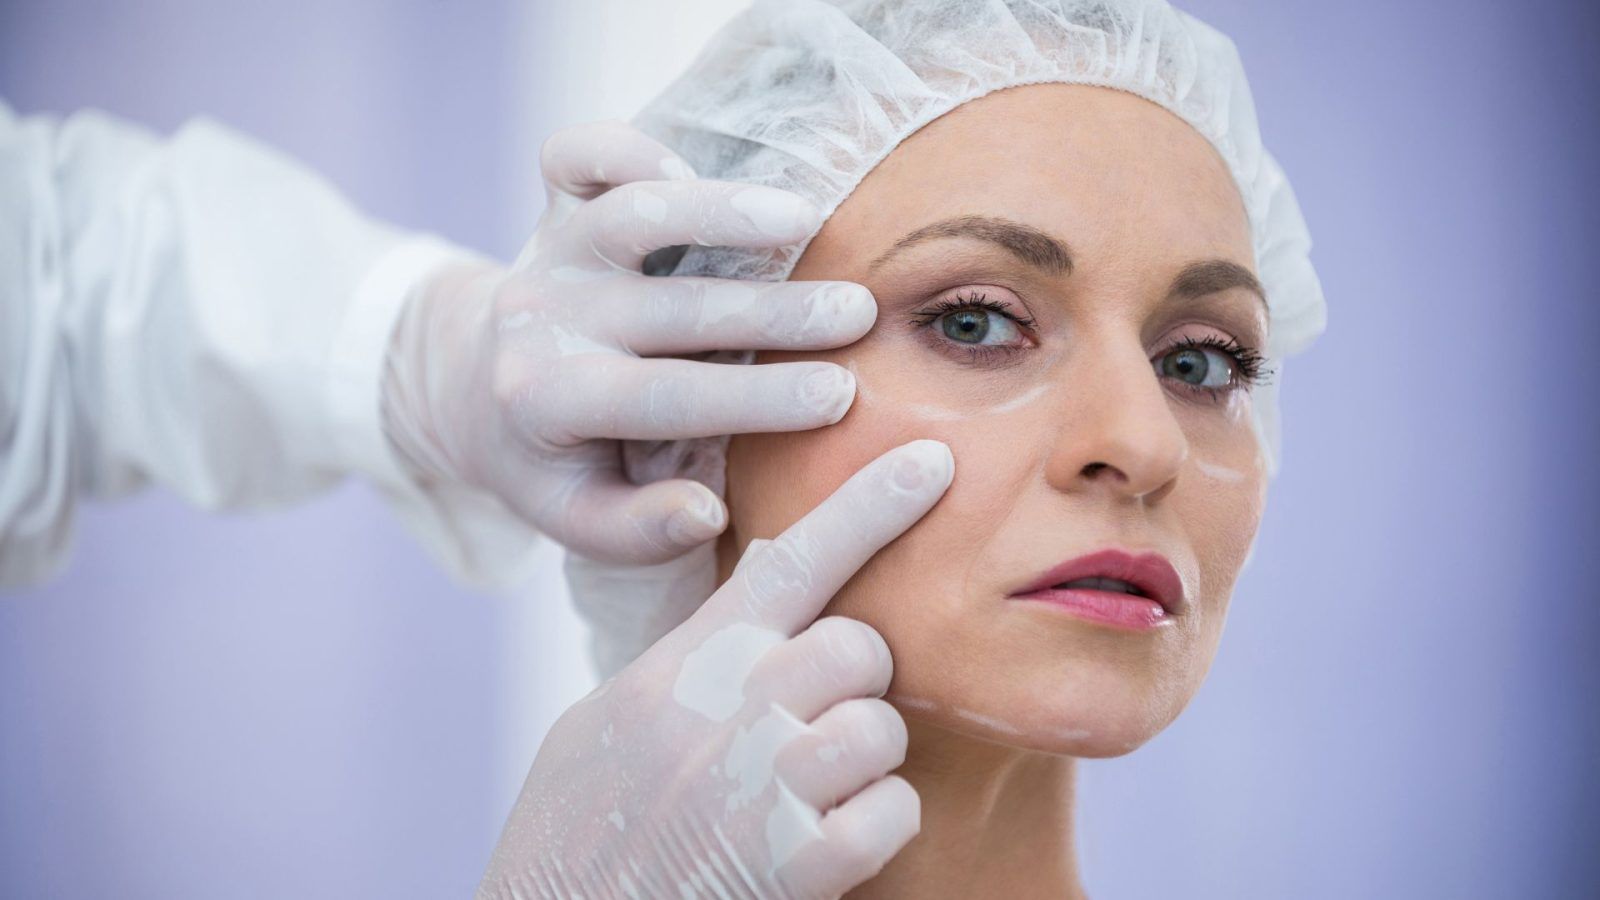 Plastic surgery in Hong Kong: Procedure, cost, and other details